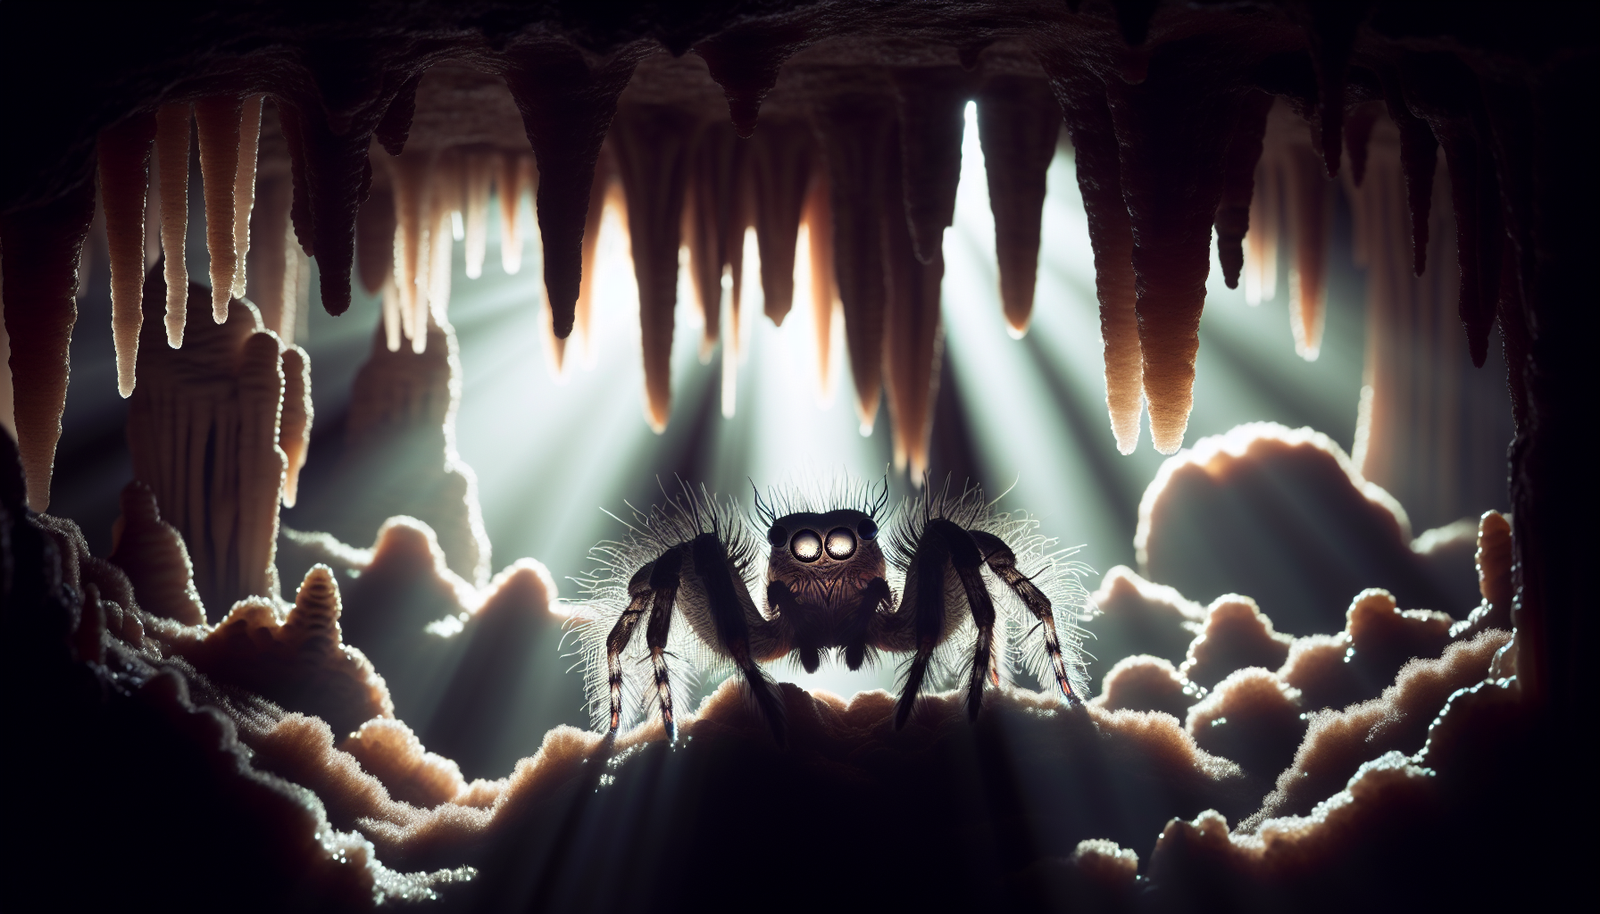 Can You Recommend Some Cave-dwelling Spider Species That Are Suitable For Captivity?